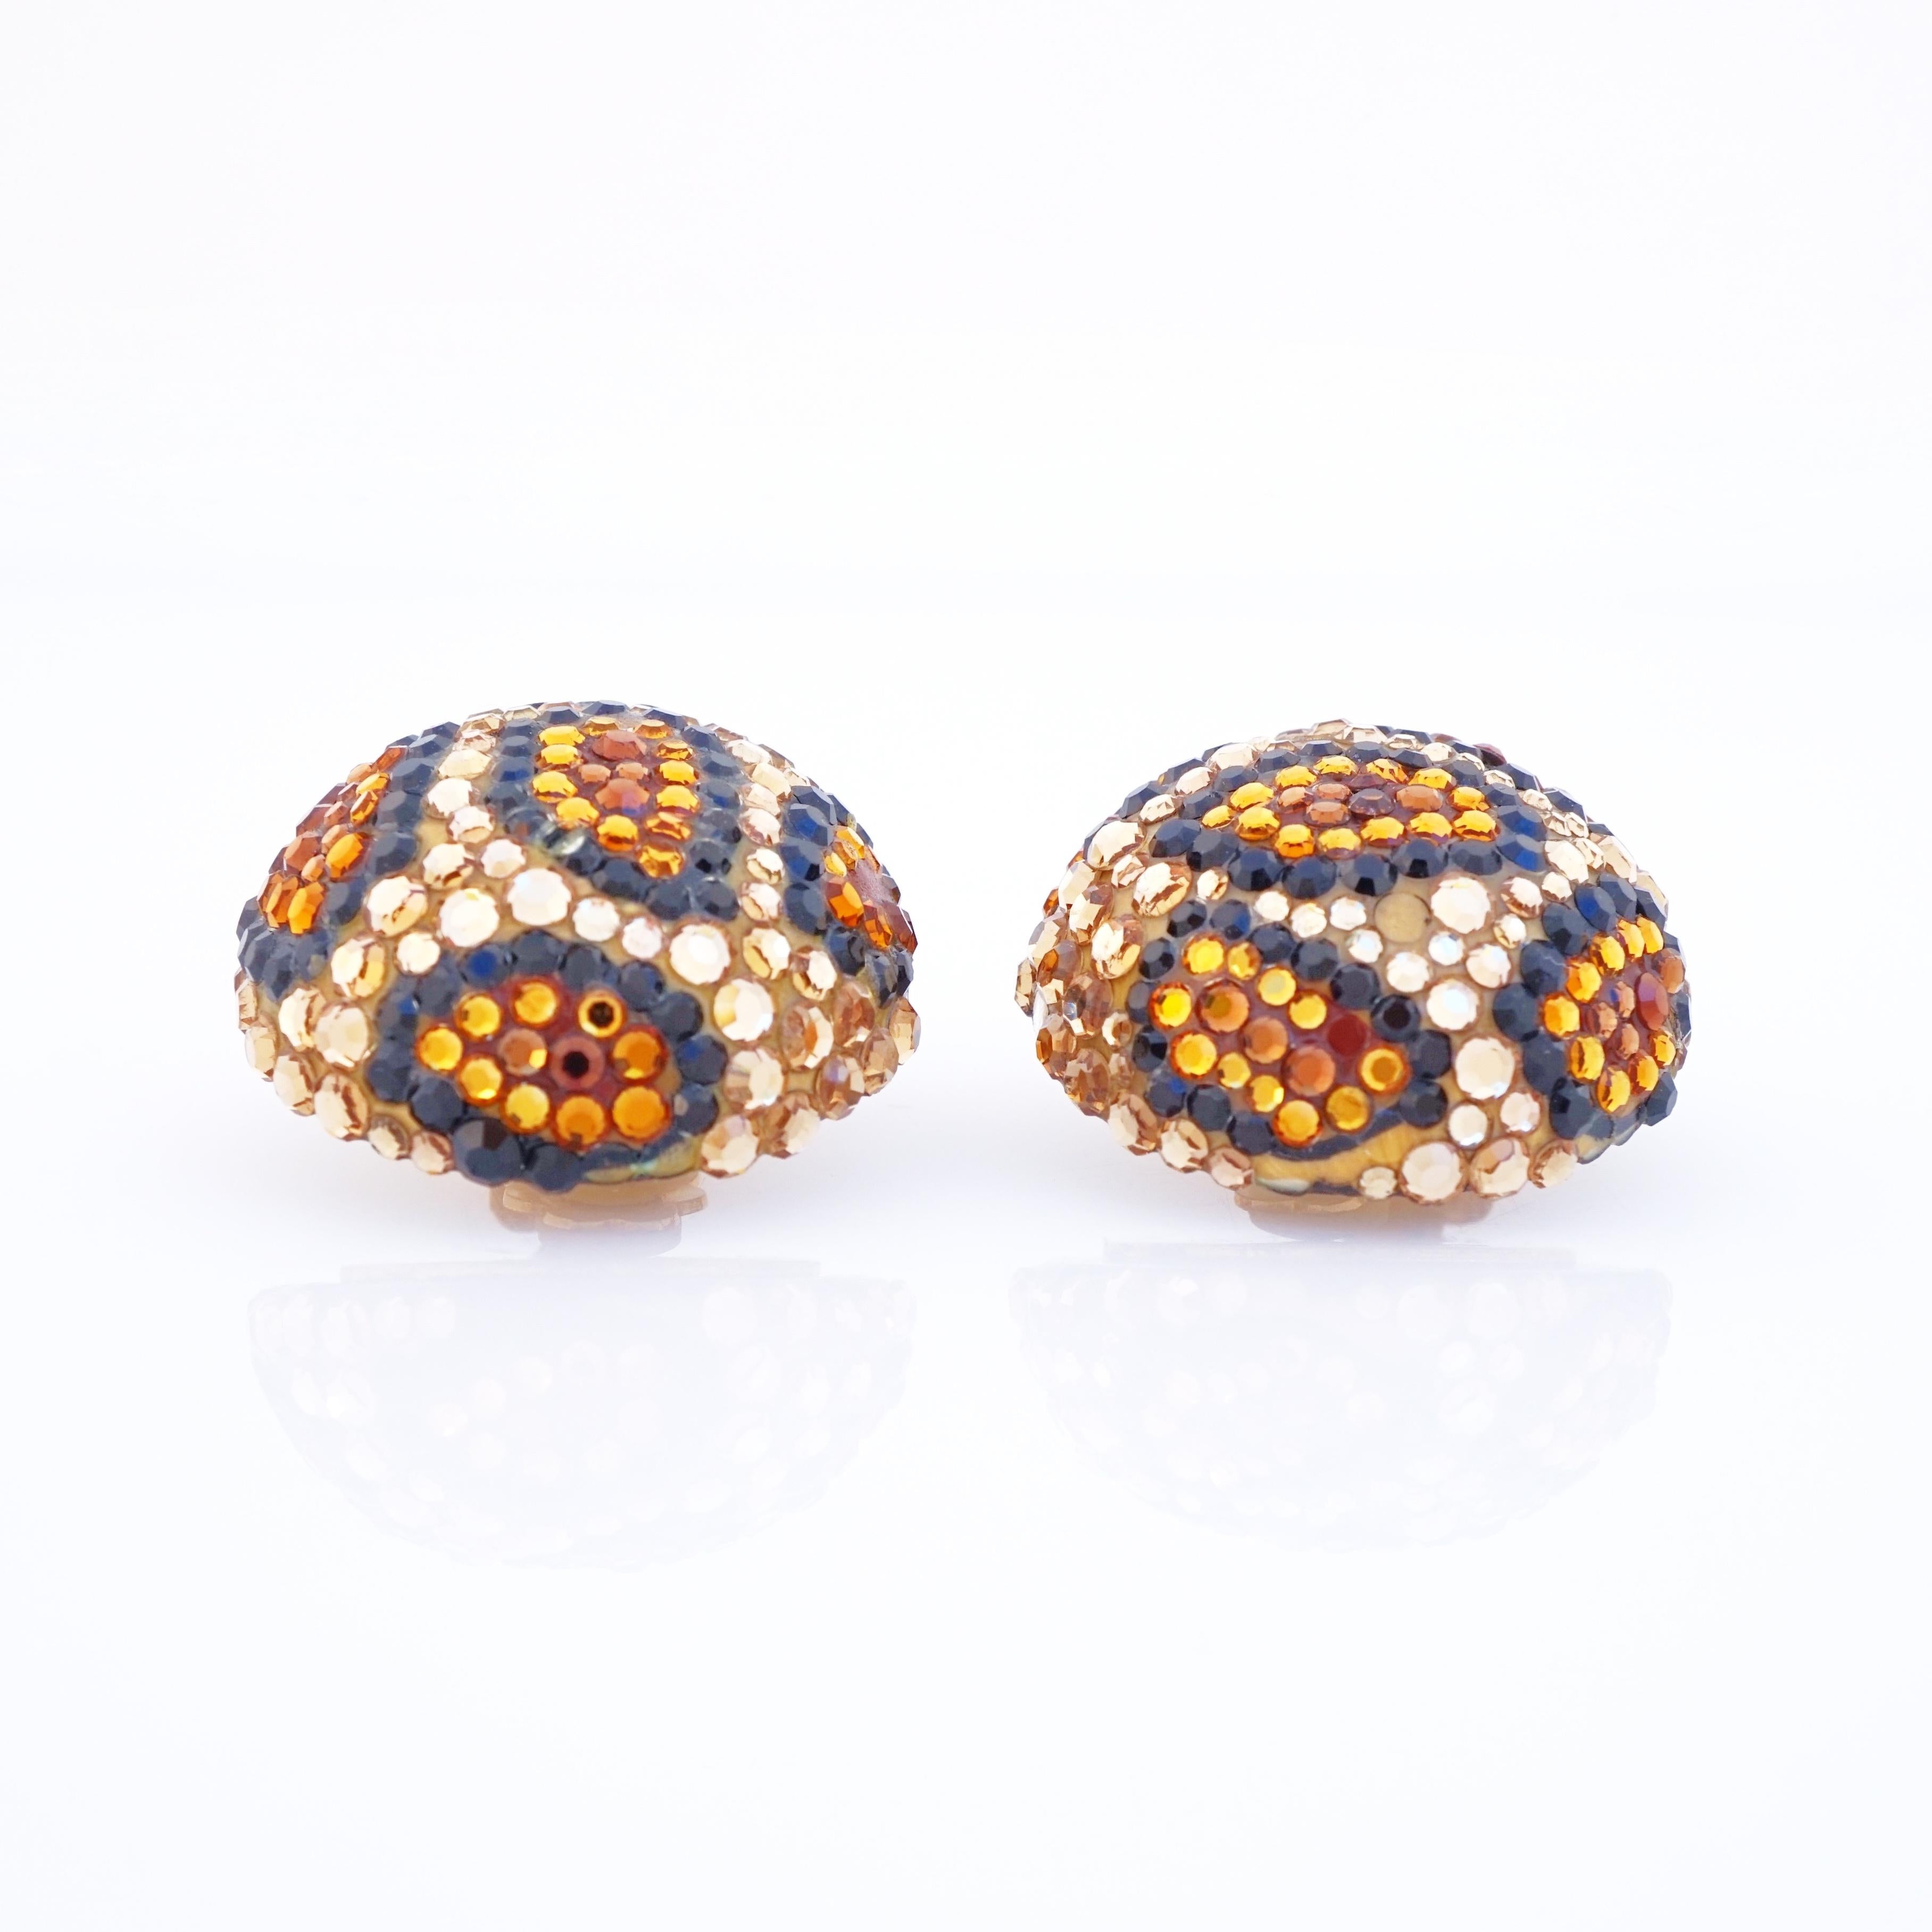 Leopard Print Crystal Encrusted Dome Earrings By Richard Kerr, 1980s In Good Condition For Sale In McKinney, TX